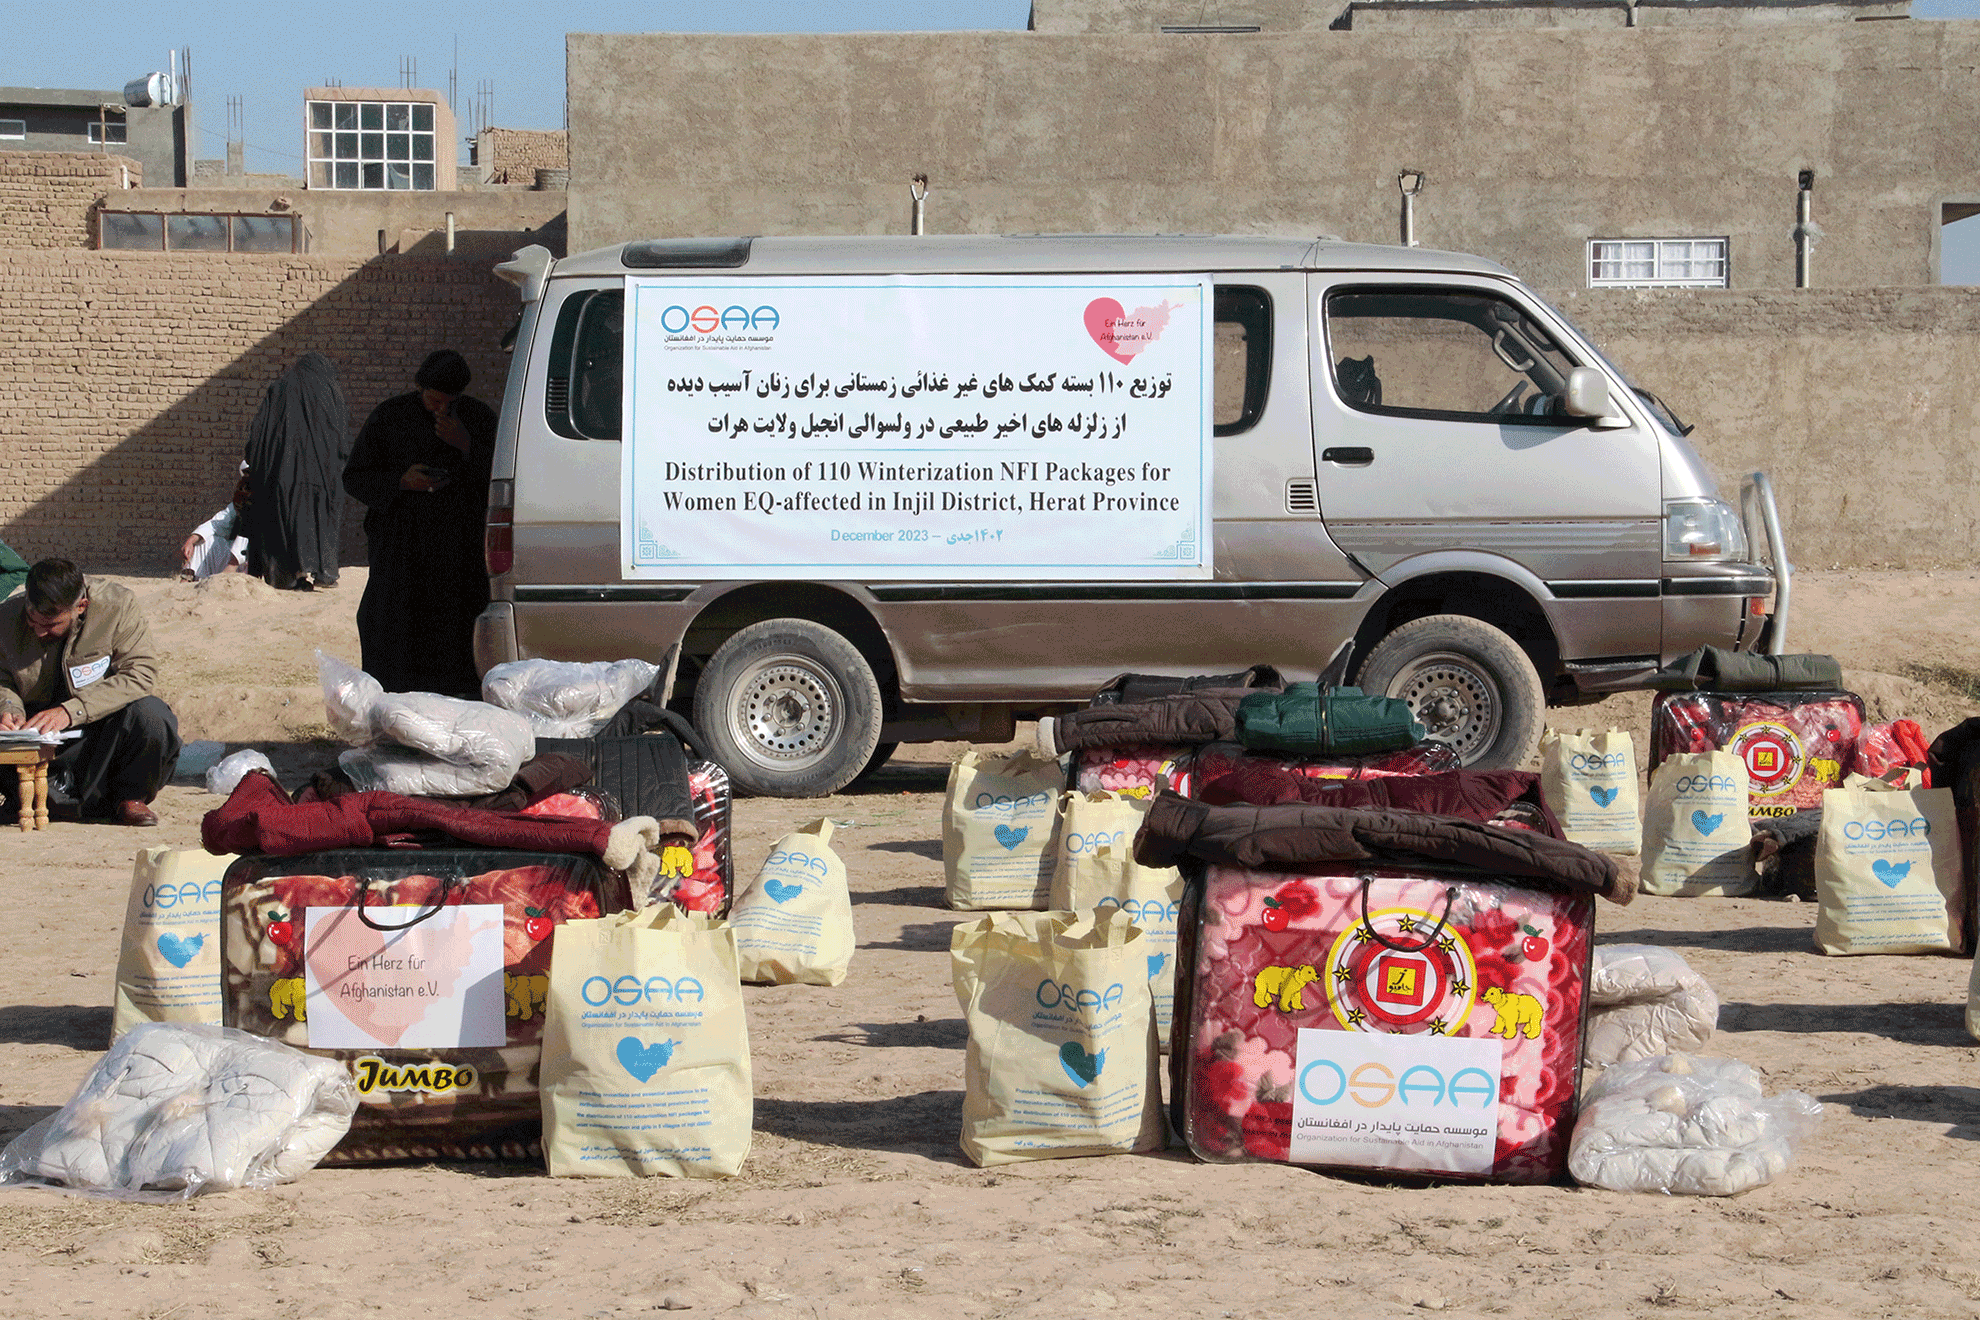 OSAA-distrobuted-donation-packages-to-volnerable-people-from-resent-Earthquake-in-Herat-Afghanistan-(135)